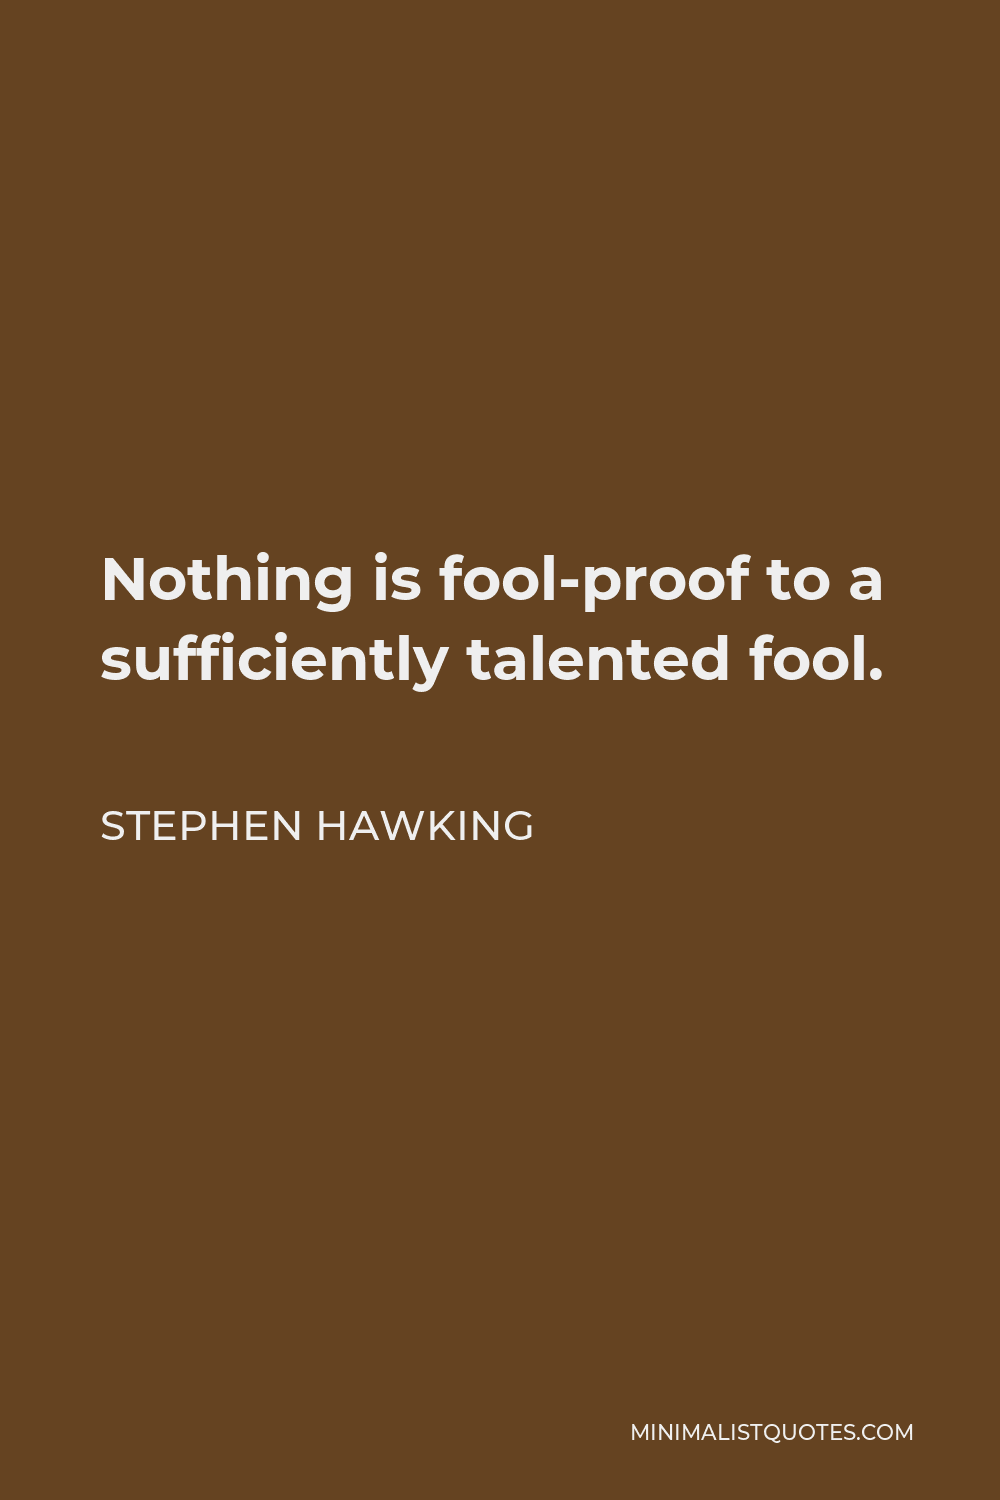 Stephen Hawking Quote - Nothing is fool-proof to a sufficiently talented fool.